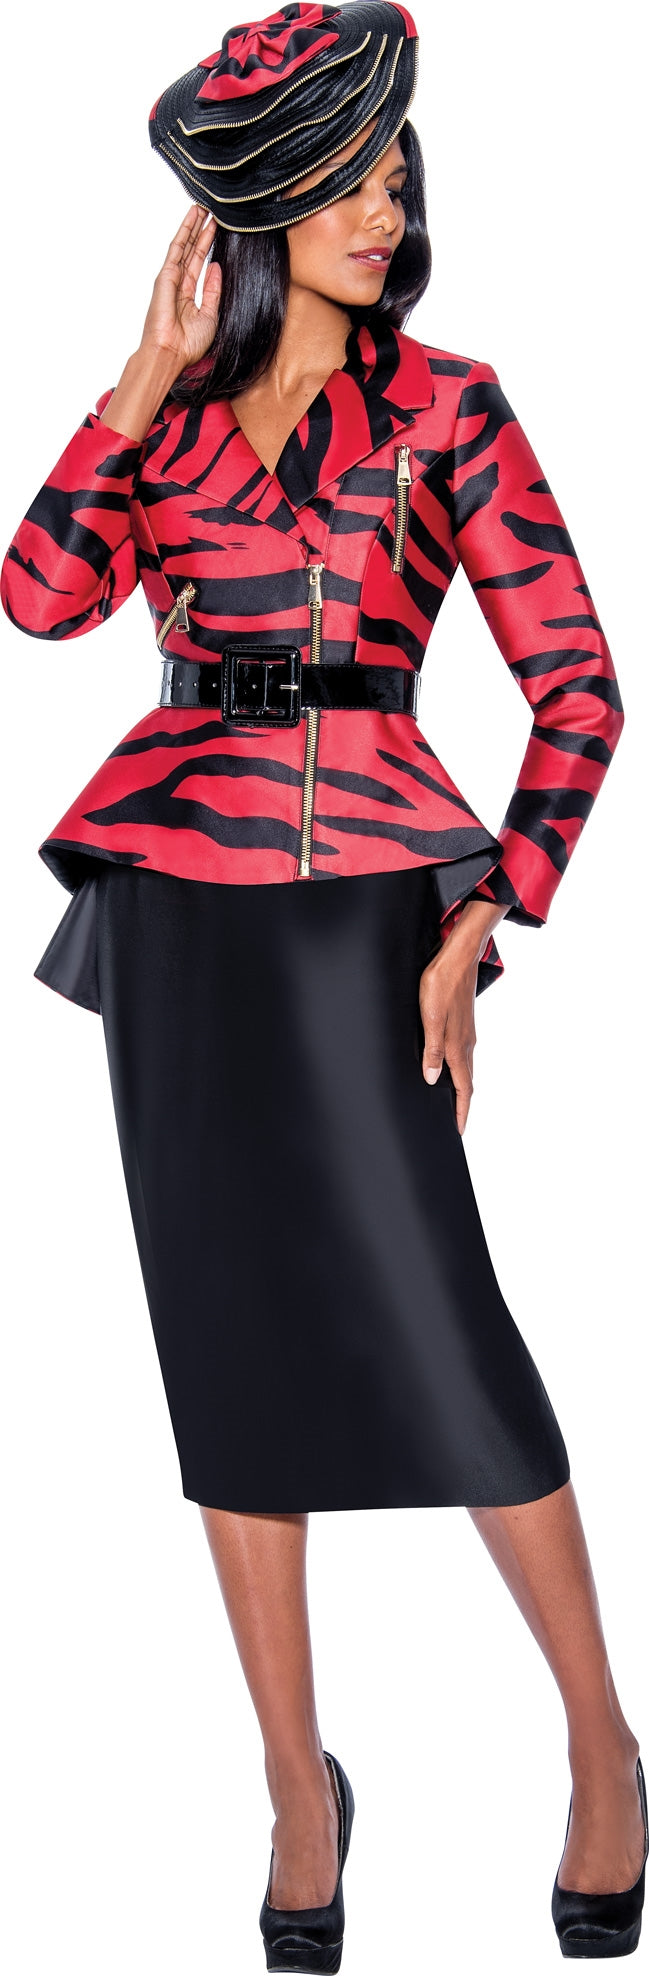 GMI Church Suit 9242-Red/Black - Church Suits For Less